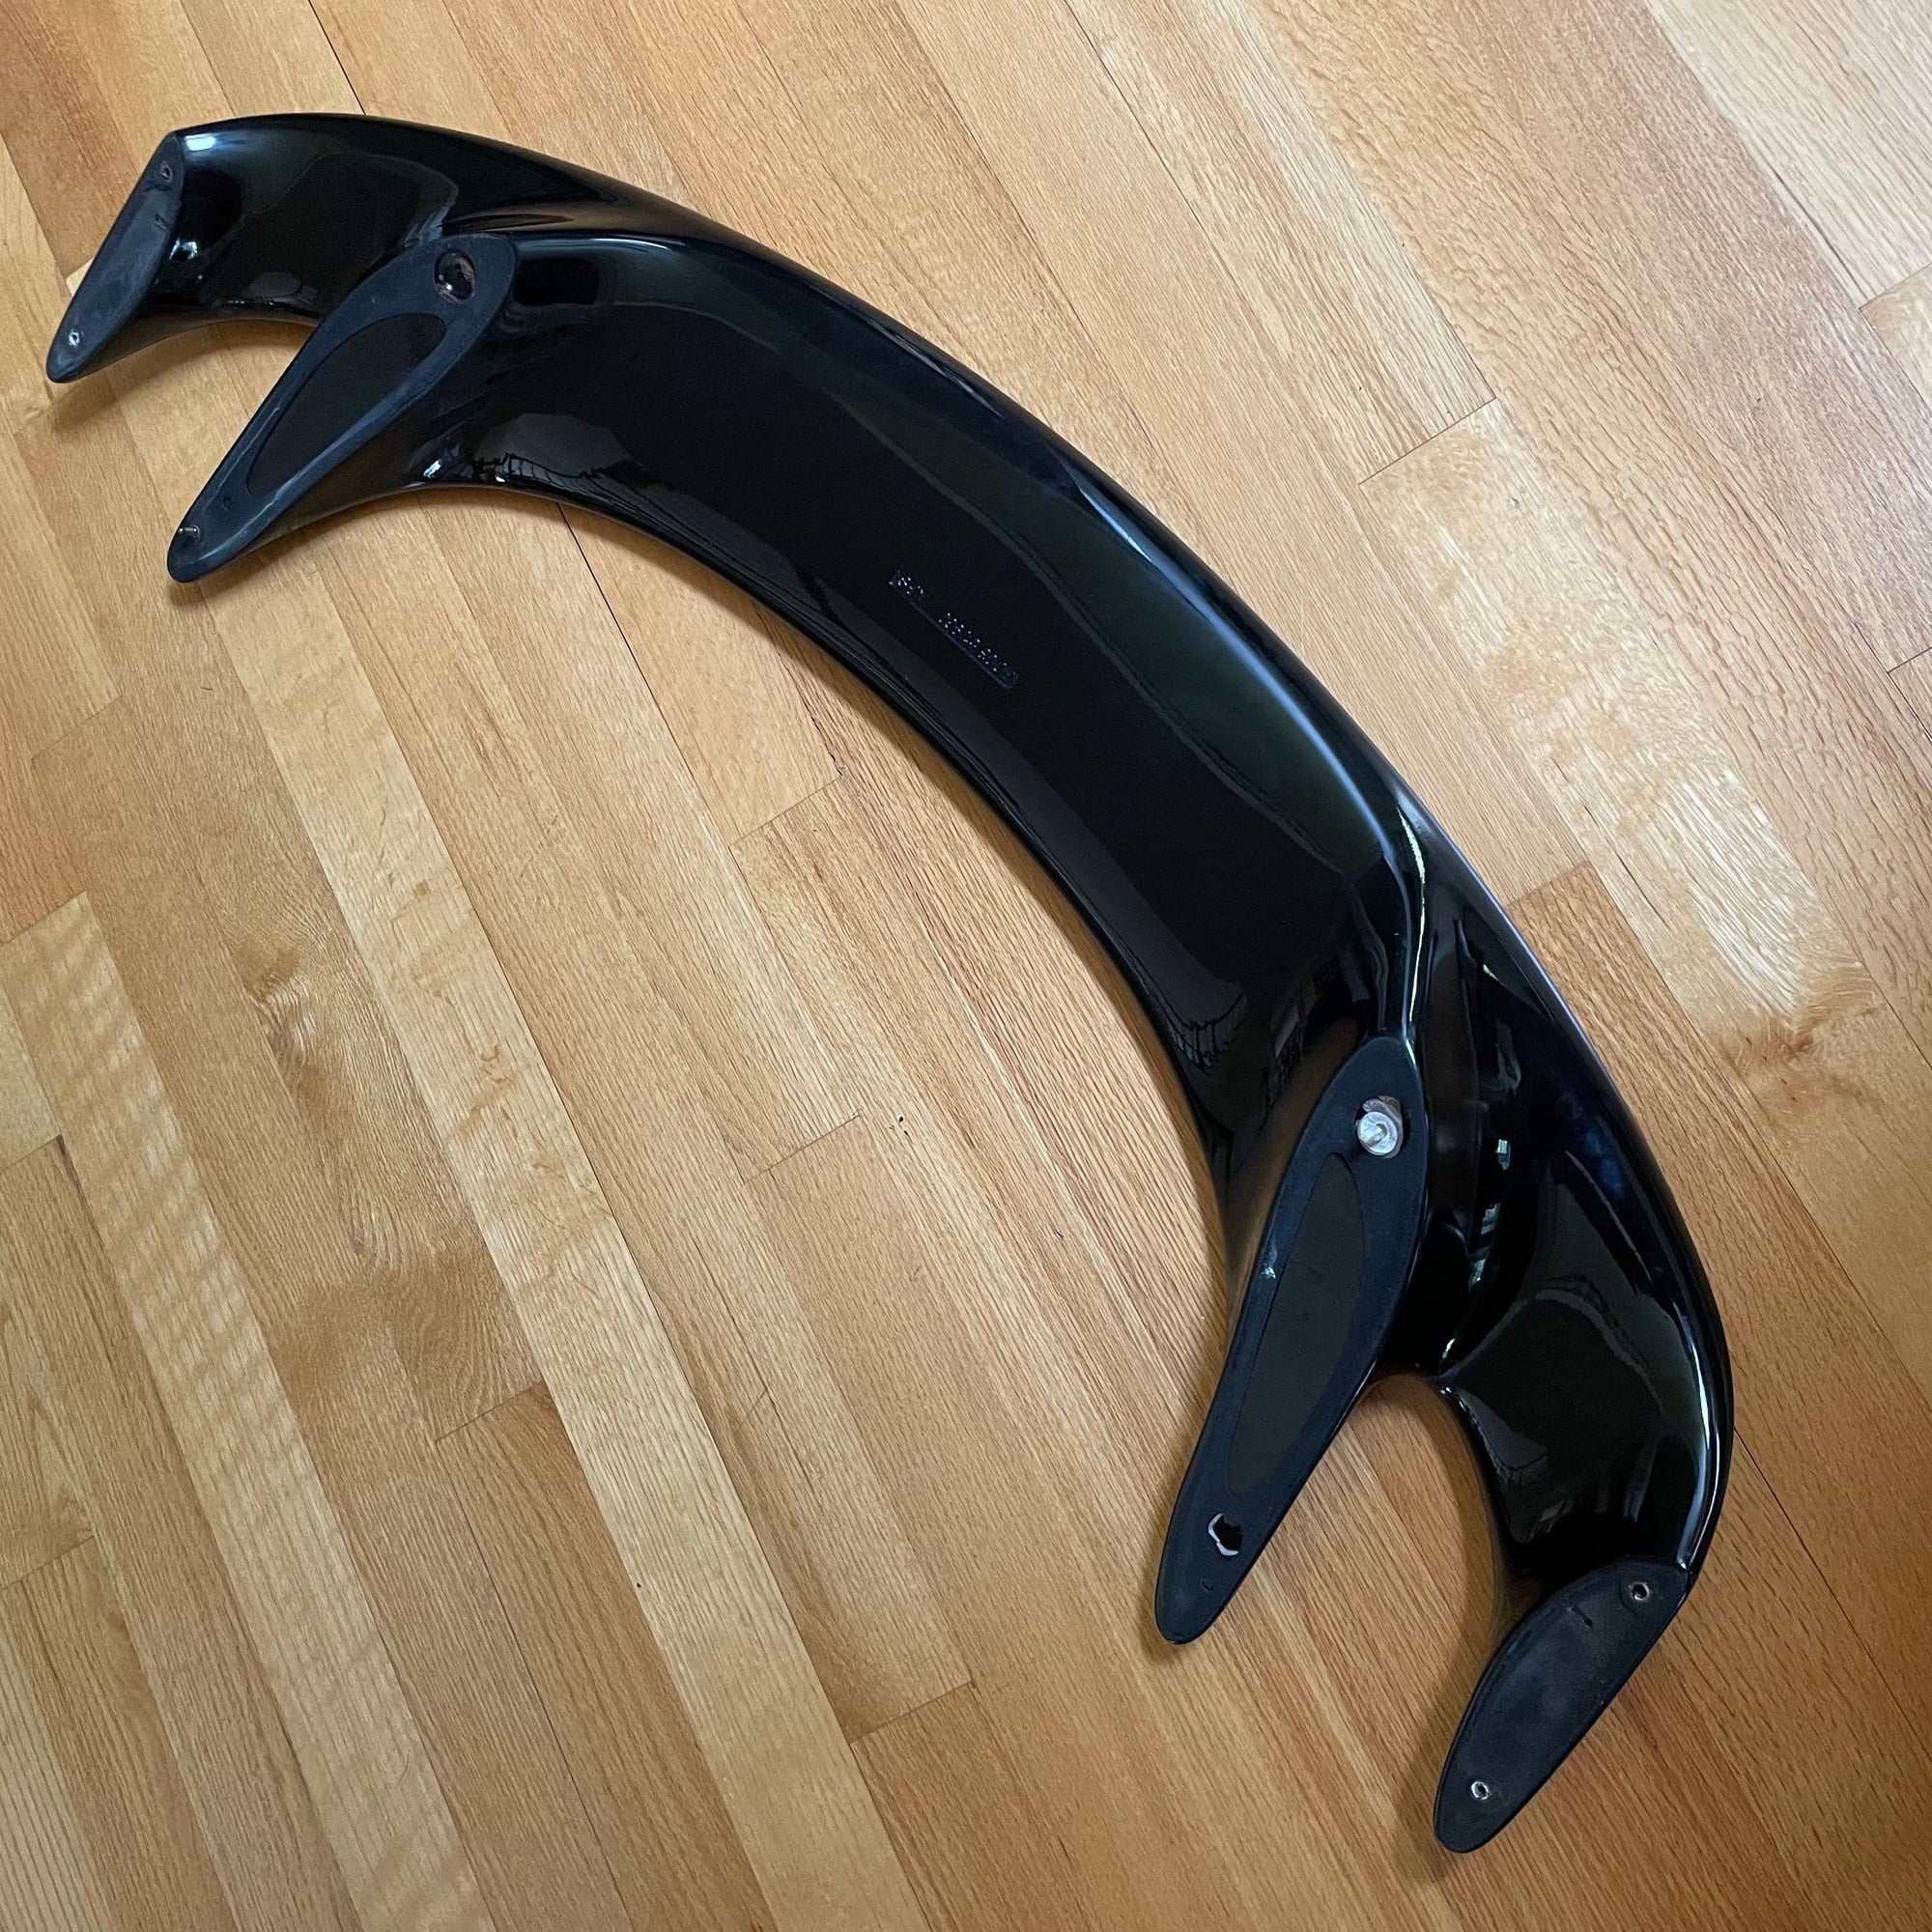 Exterior Body Parts - FS:  spoiler / wing (stock) for a 3rd gen - Used - 1992 to 2002 Mazda RX-7 - Tega Cay, SC 29708, United States